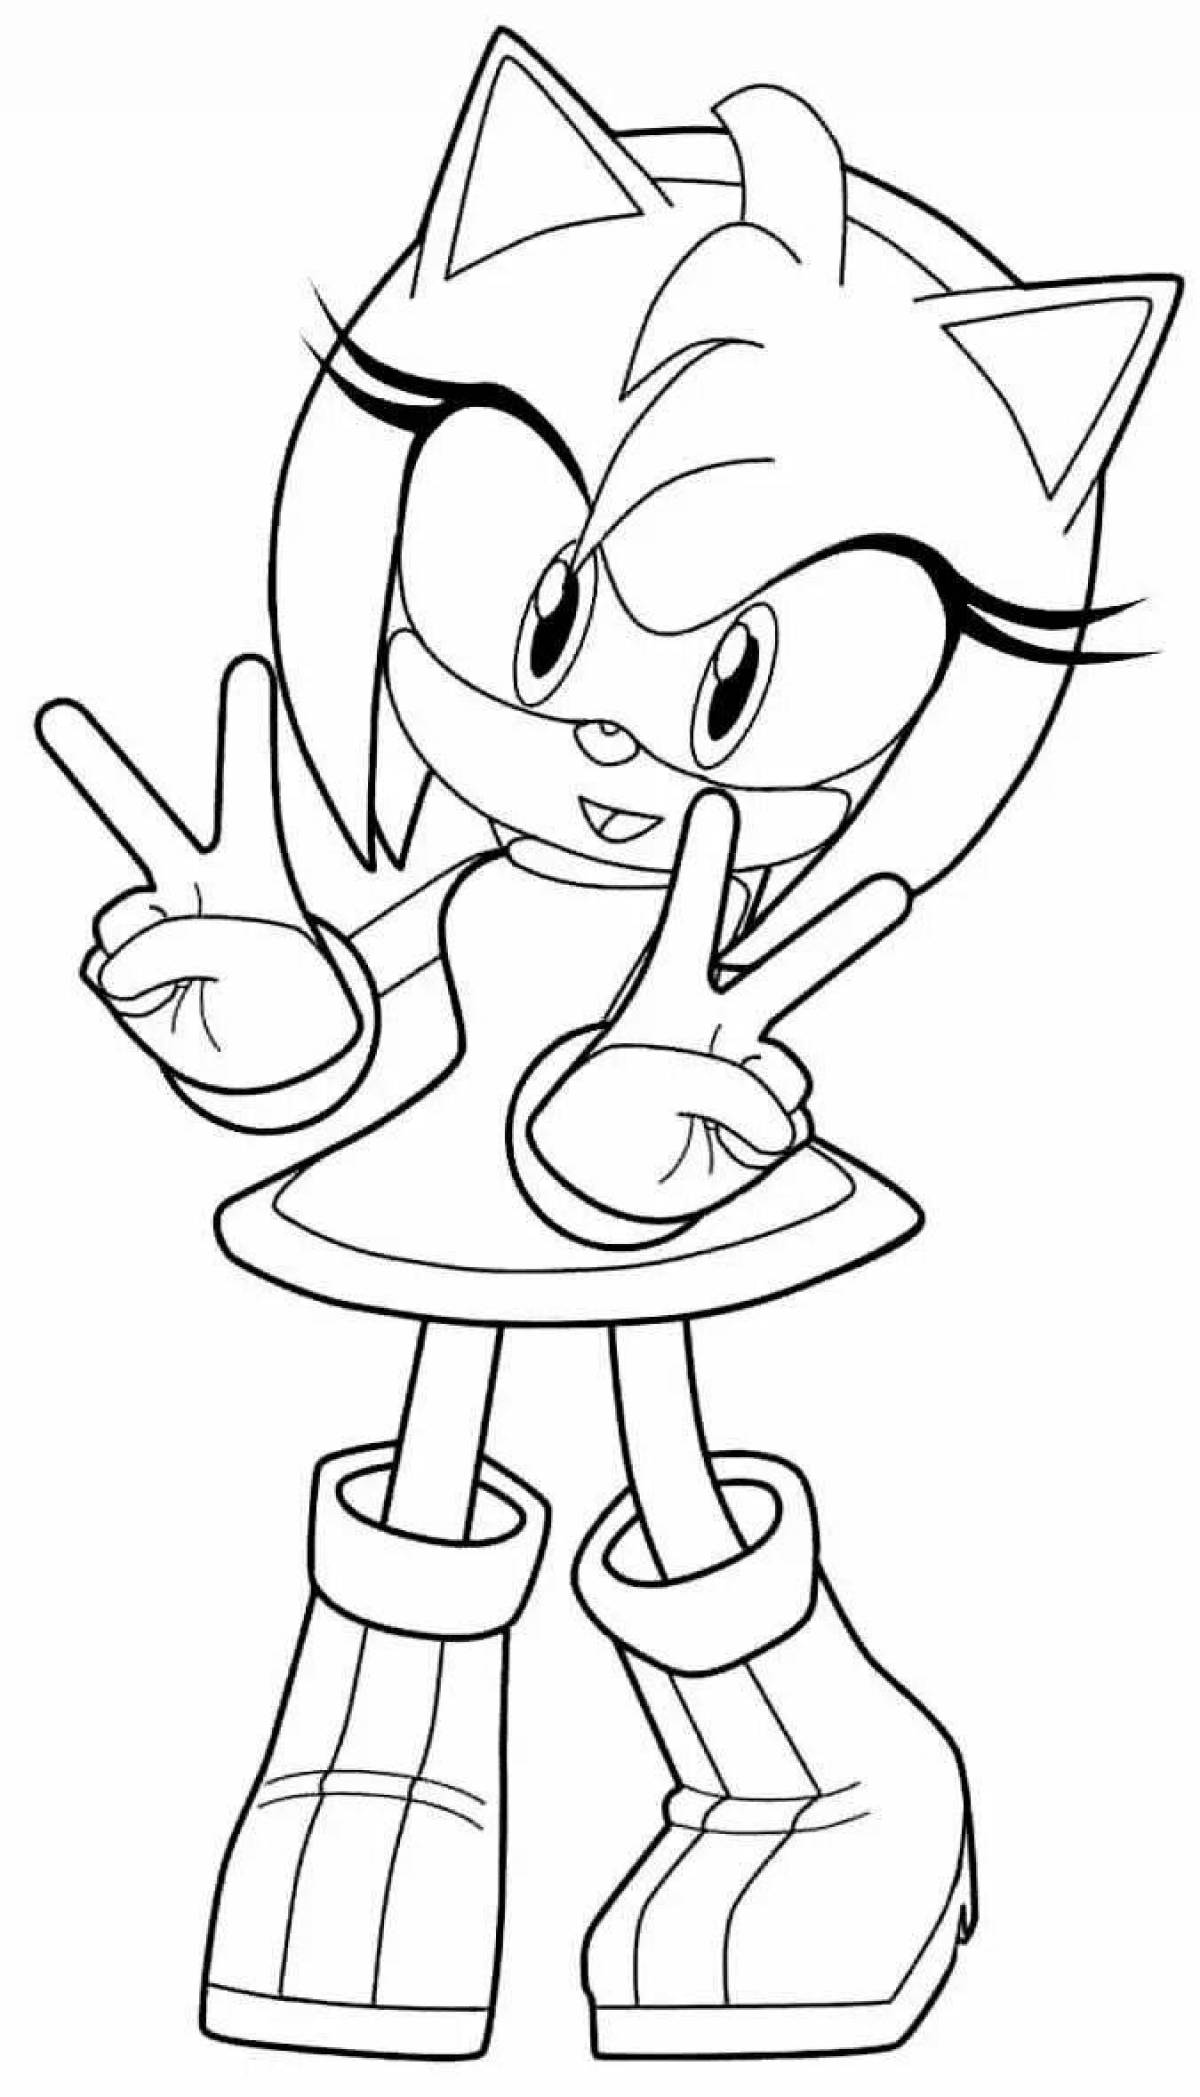 Sonic heroes inspirational coloring book